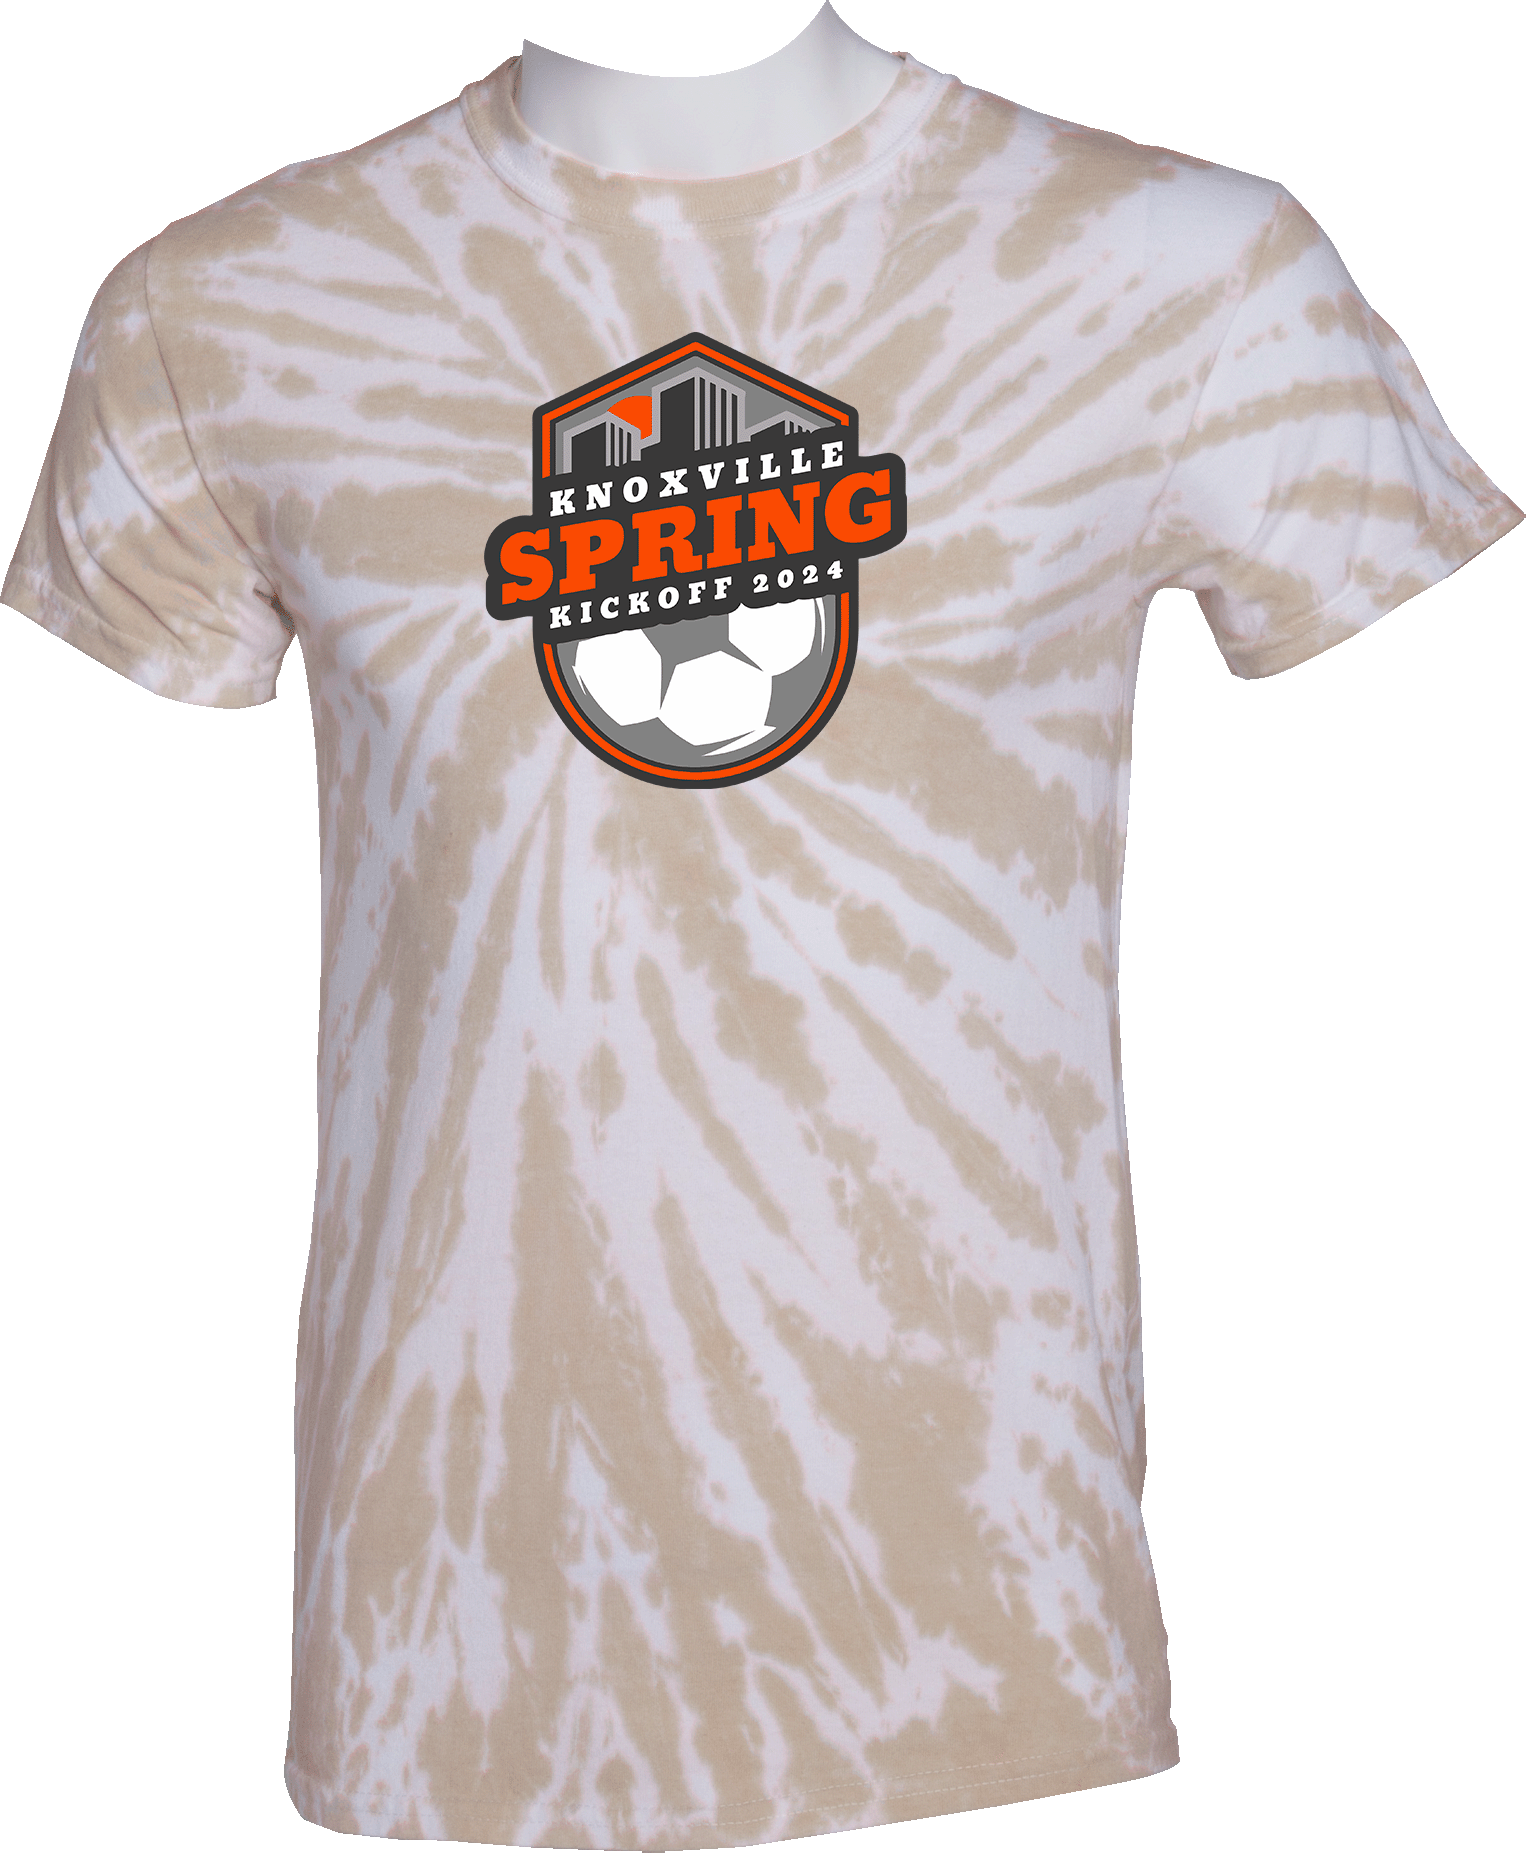 Tie-Dye Short Sleeves - 2024 Knoxville Spring Kickoff